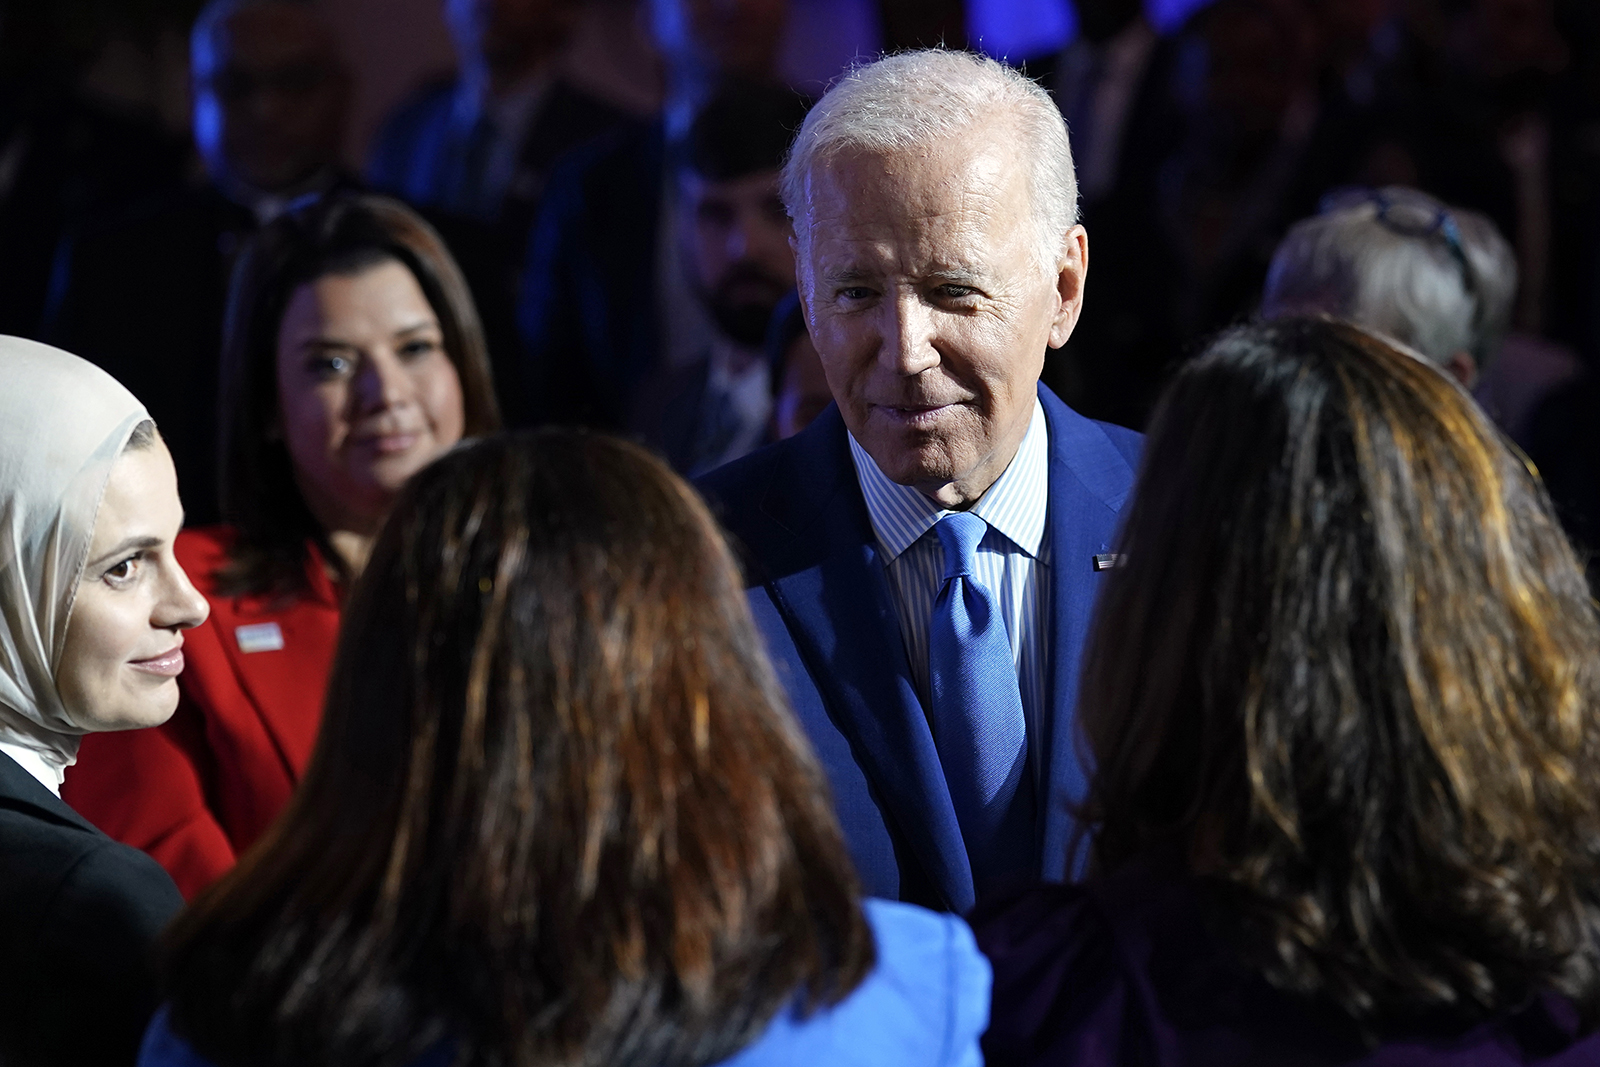 President Joe Biden greets people after speaking at the United We Stand Summit in the East Room of the White House in Washington, Thursday, Sept. 15, 2022. The summit is aimed at combating a spate of hate-fueled violence in the U.S., as he works to deliver on his campaign pledge to "heal the soul of the nation." (AP Photo/Susan Walsh)